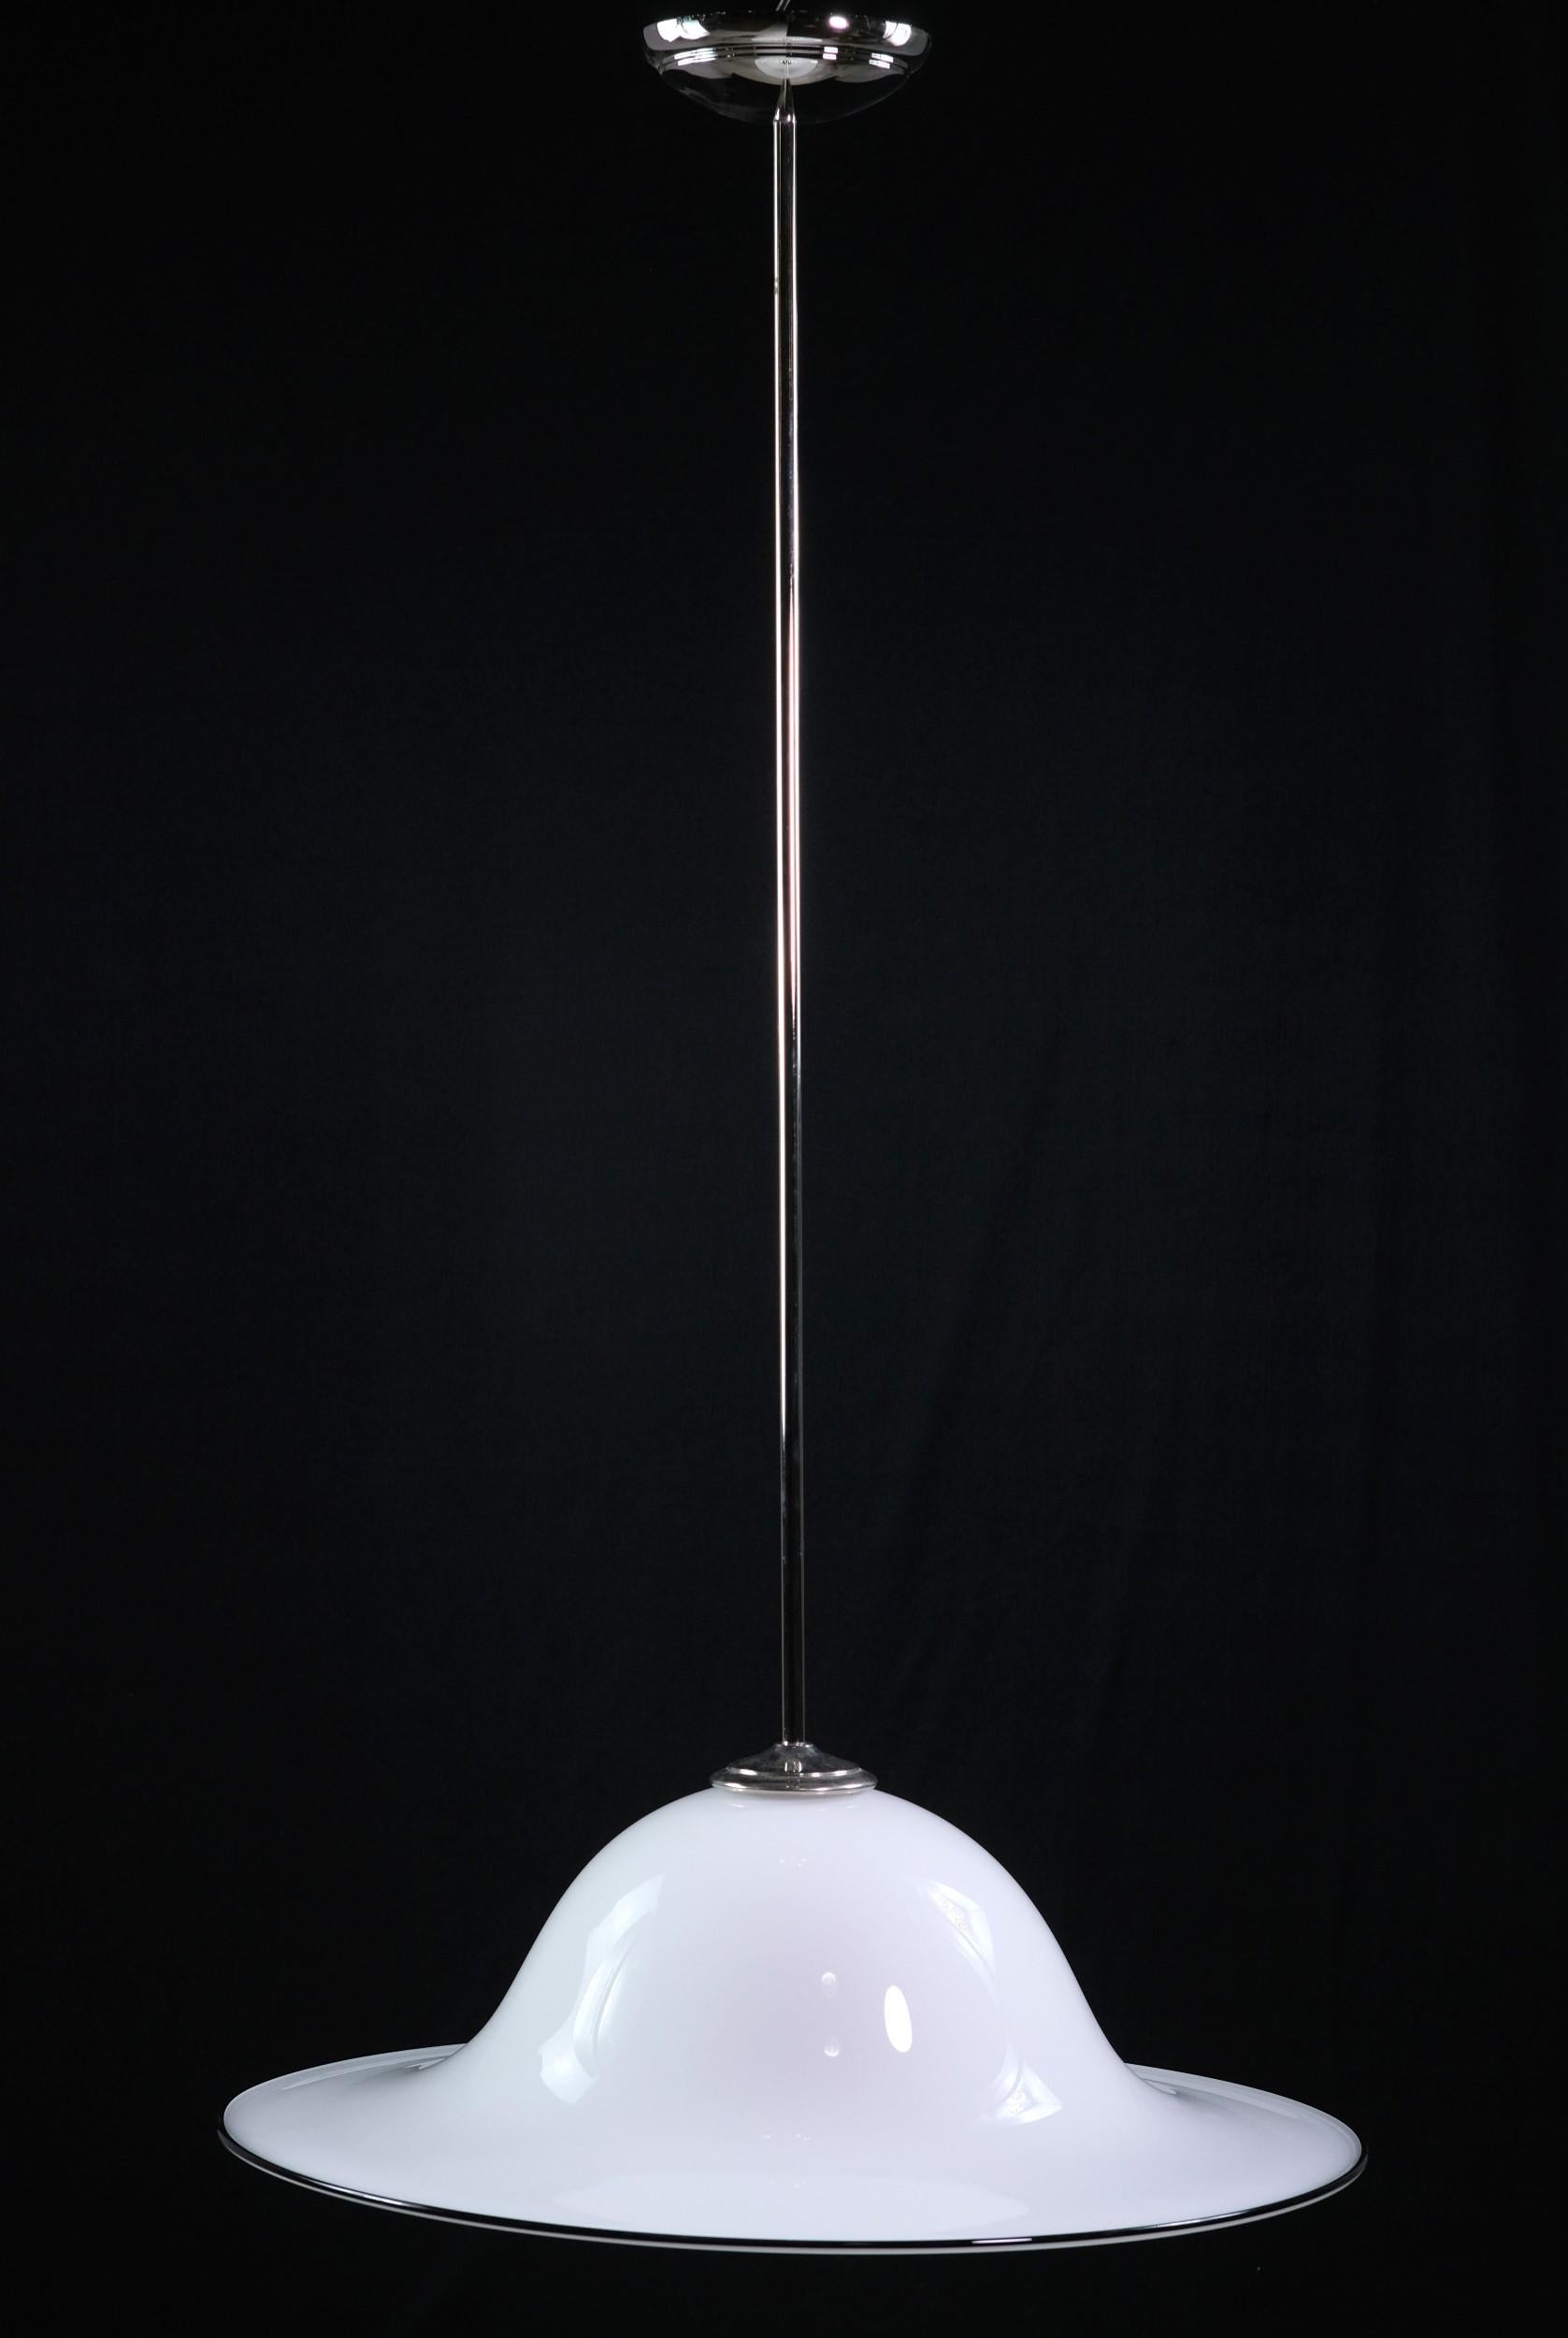 Large size Italian white Vetri Murano glass shade featuring a black rim pole mounted with a nickel finish. Hand blown glass shade. This can be seen at our 400 Gilligan St location in Scranton, PA.